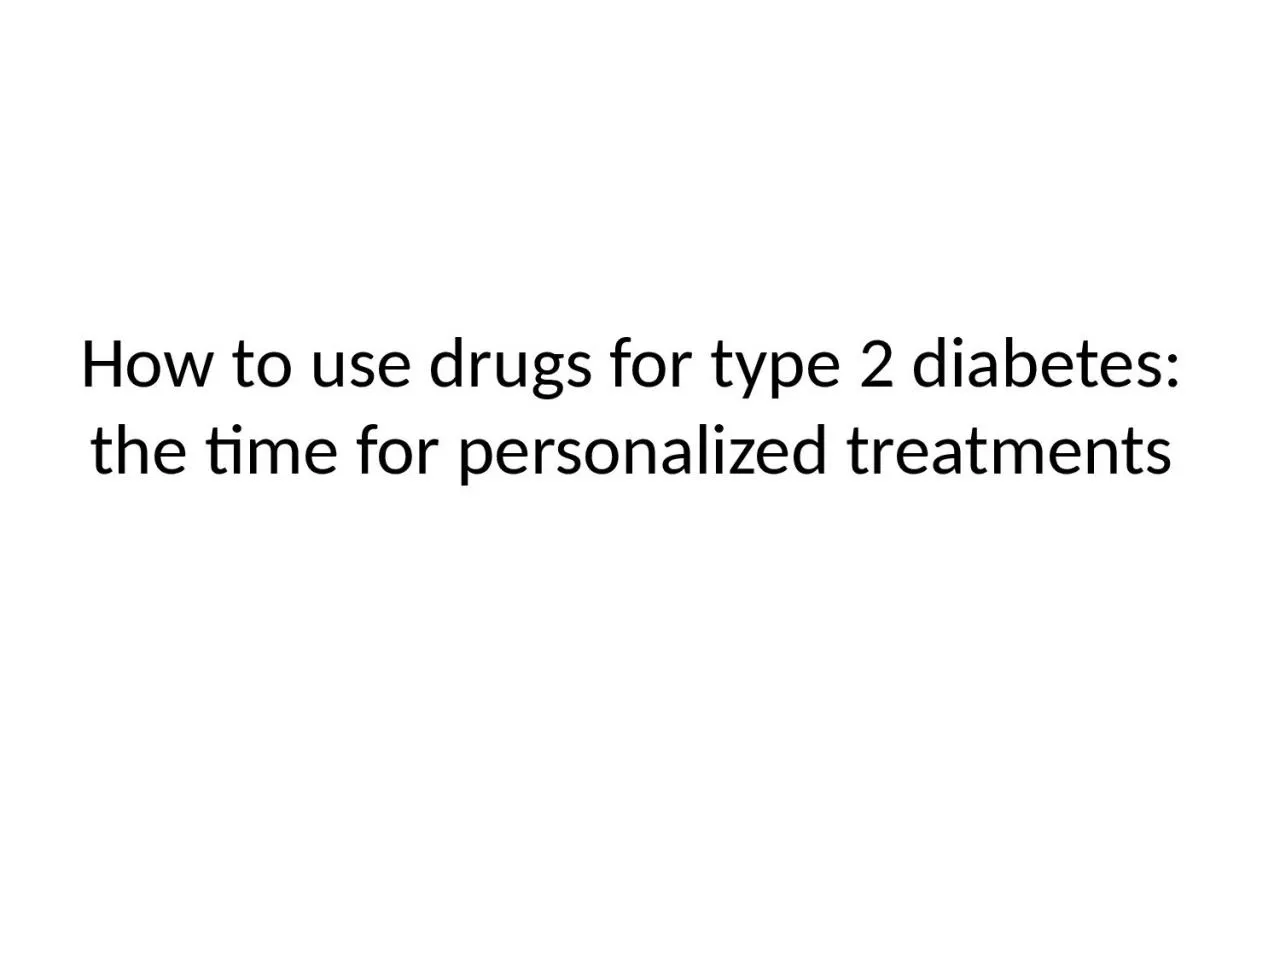 How to use drugs for type 2 diabetes: